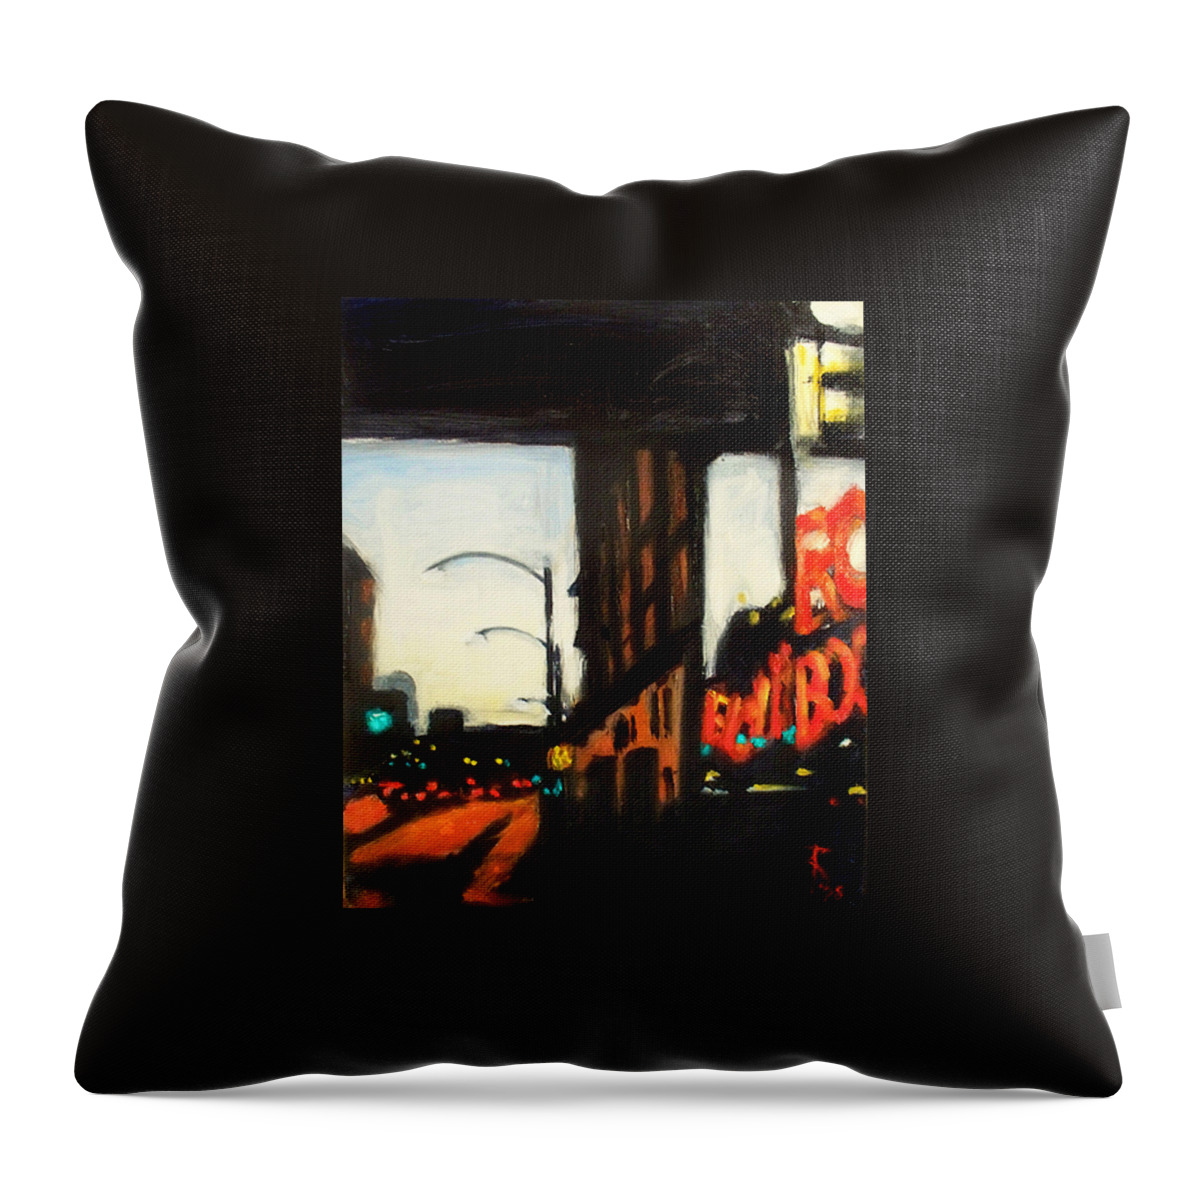 Rob Reeves Throw Pillow featuring the painting Twilight in Red and Black by Robert Reeves